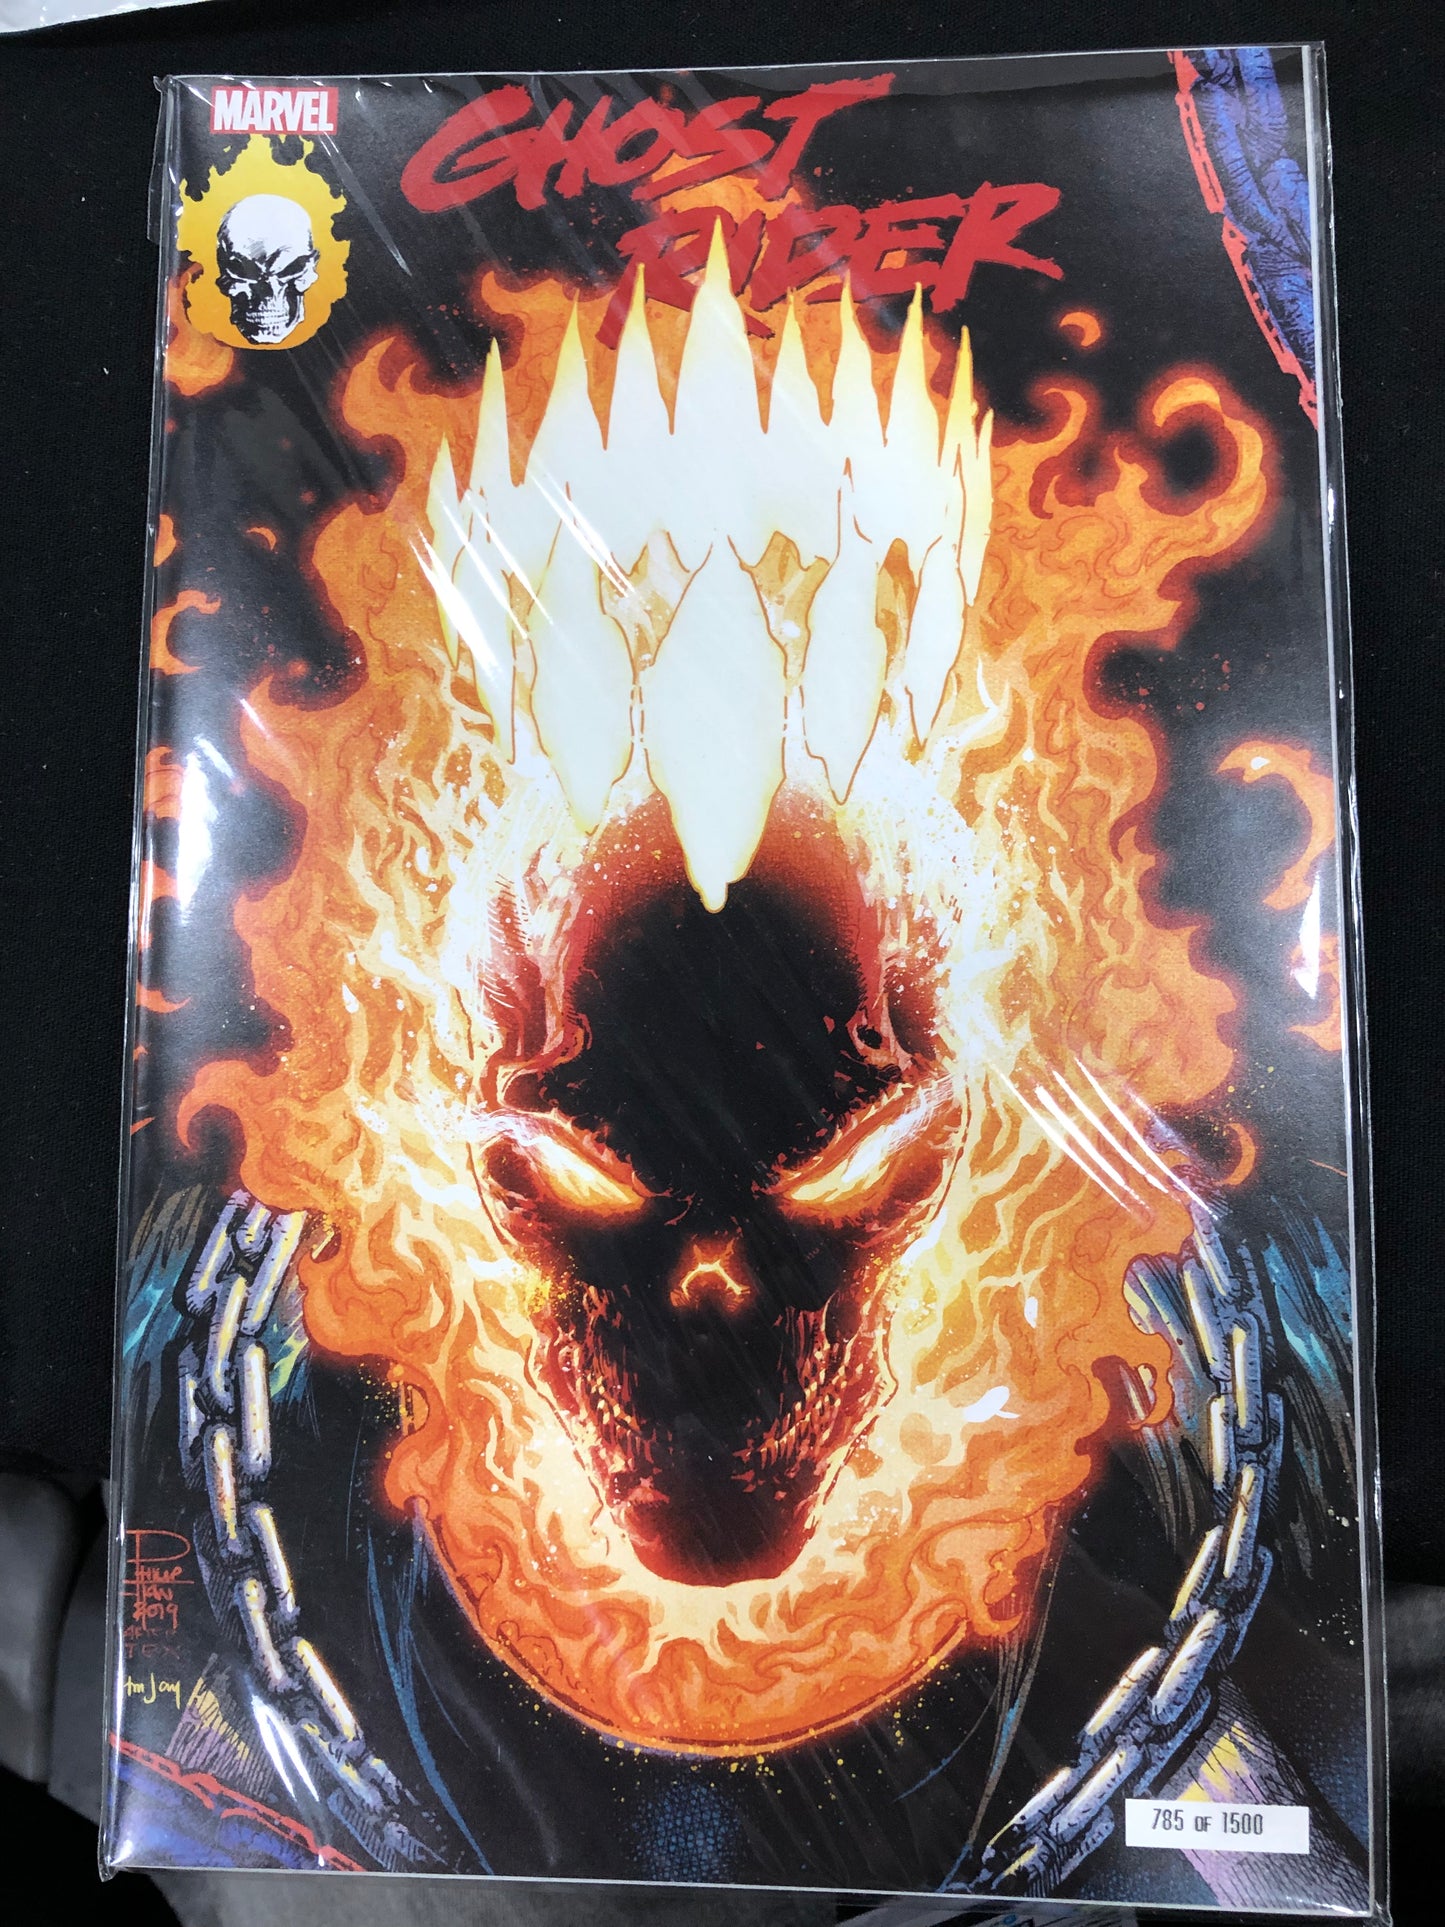 GHOST RIDER #1 NYCC TAN GLOW IN THE DARK VARIANT